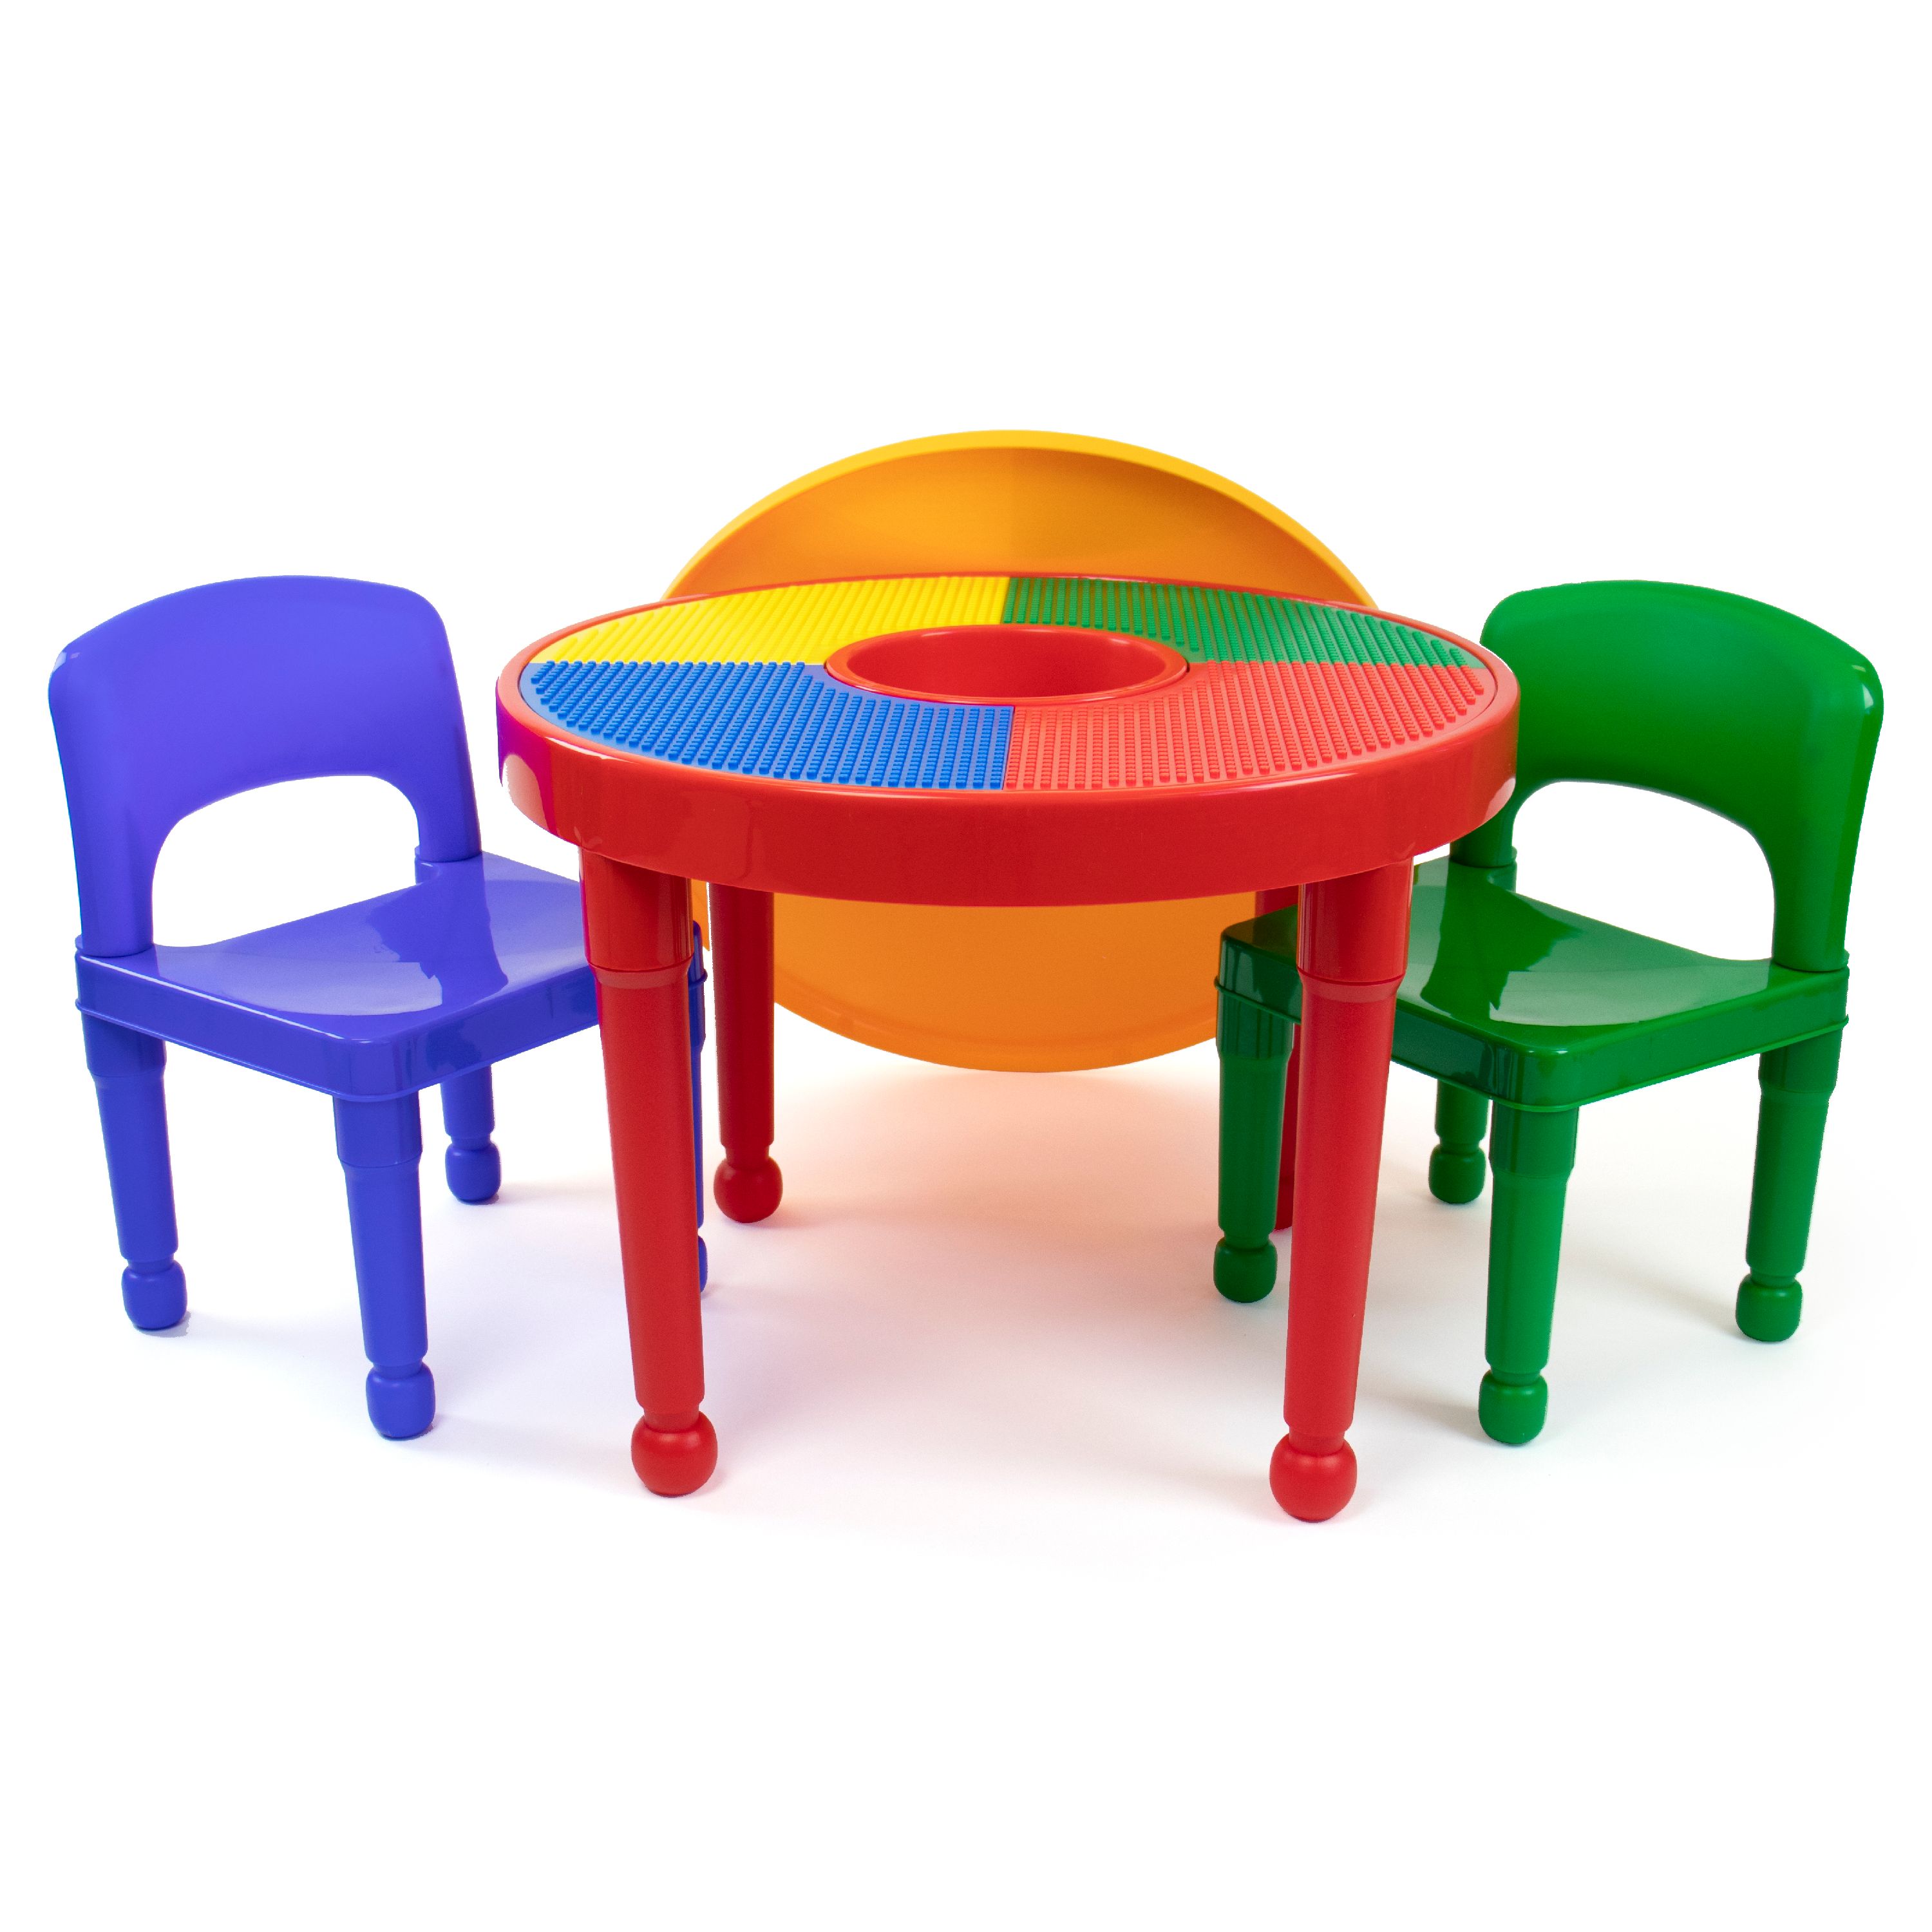 Humble Crew Kids 2-in-1 Plastic Dry Erase and Activity Table and 2 Chairs Set, Red, Green & Blue - image 4 of 8